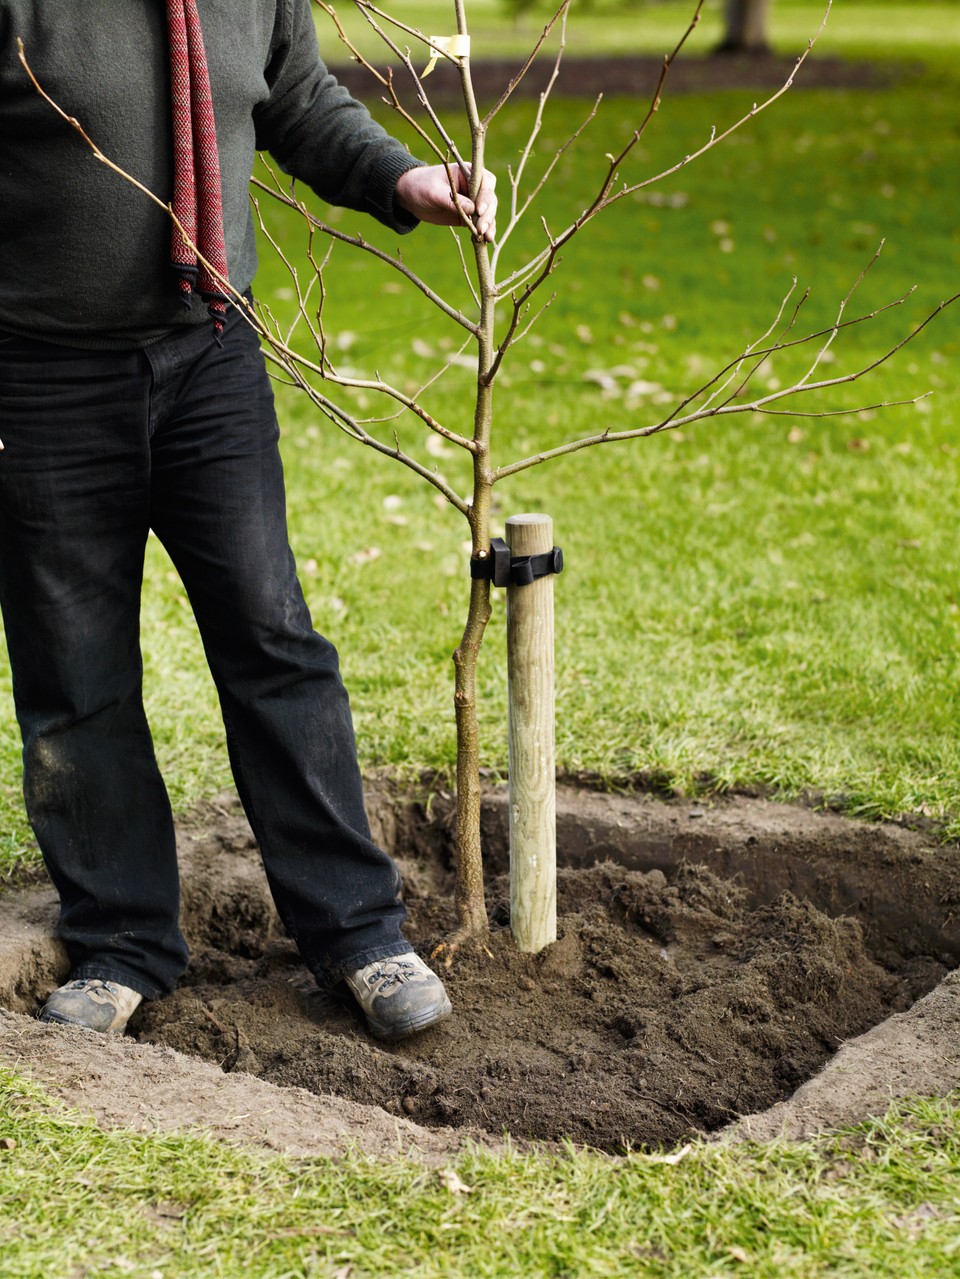 Planting a Tree in the Garden